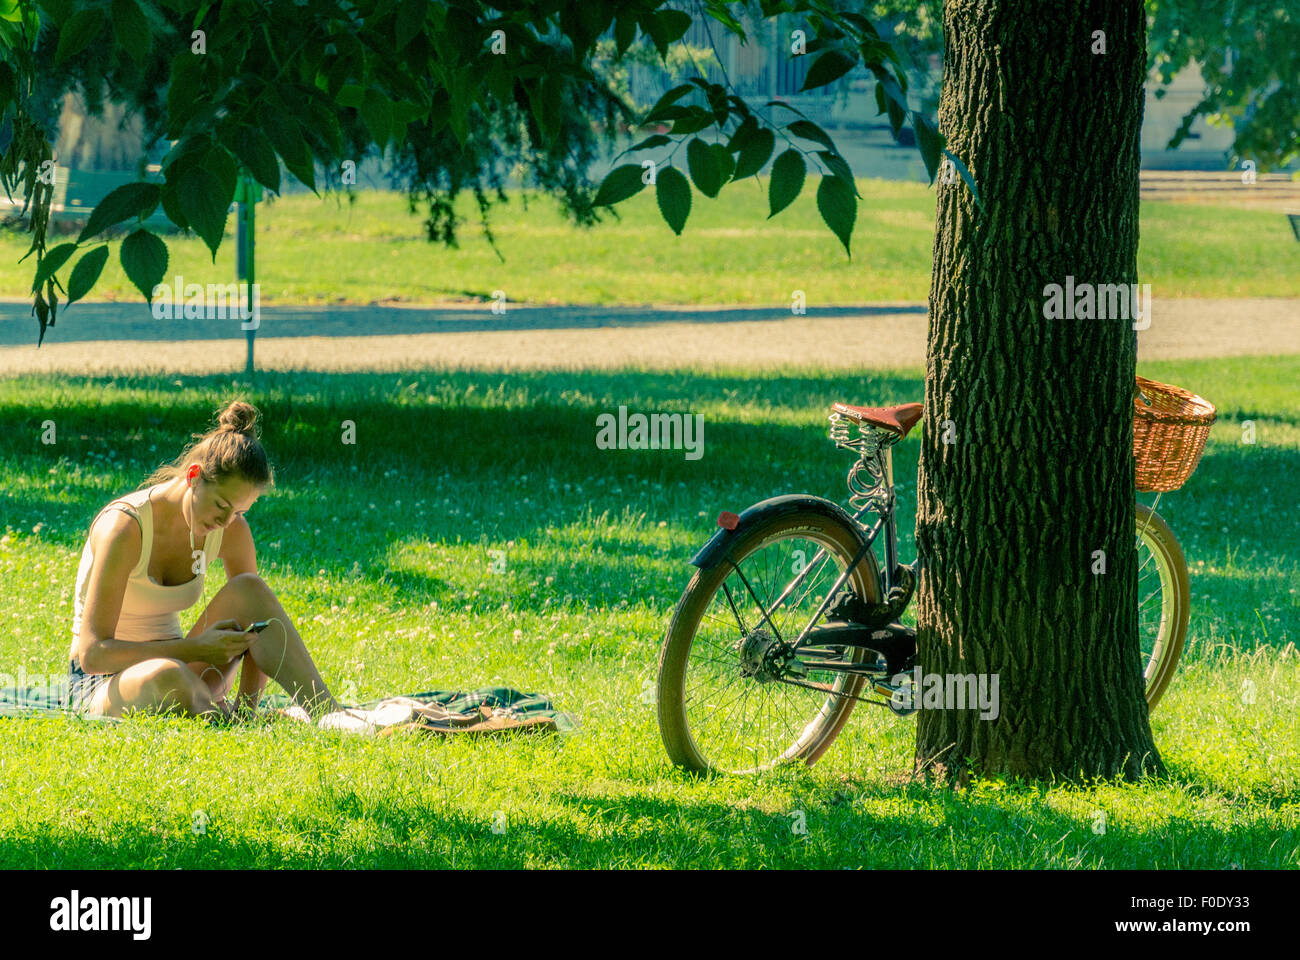 Girl listening to MP3 player in Montanelli Park, Milan Stock Photo